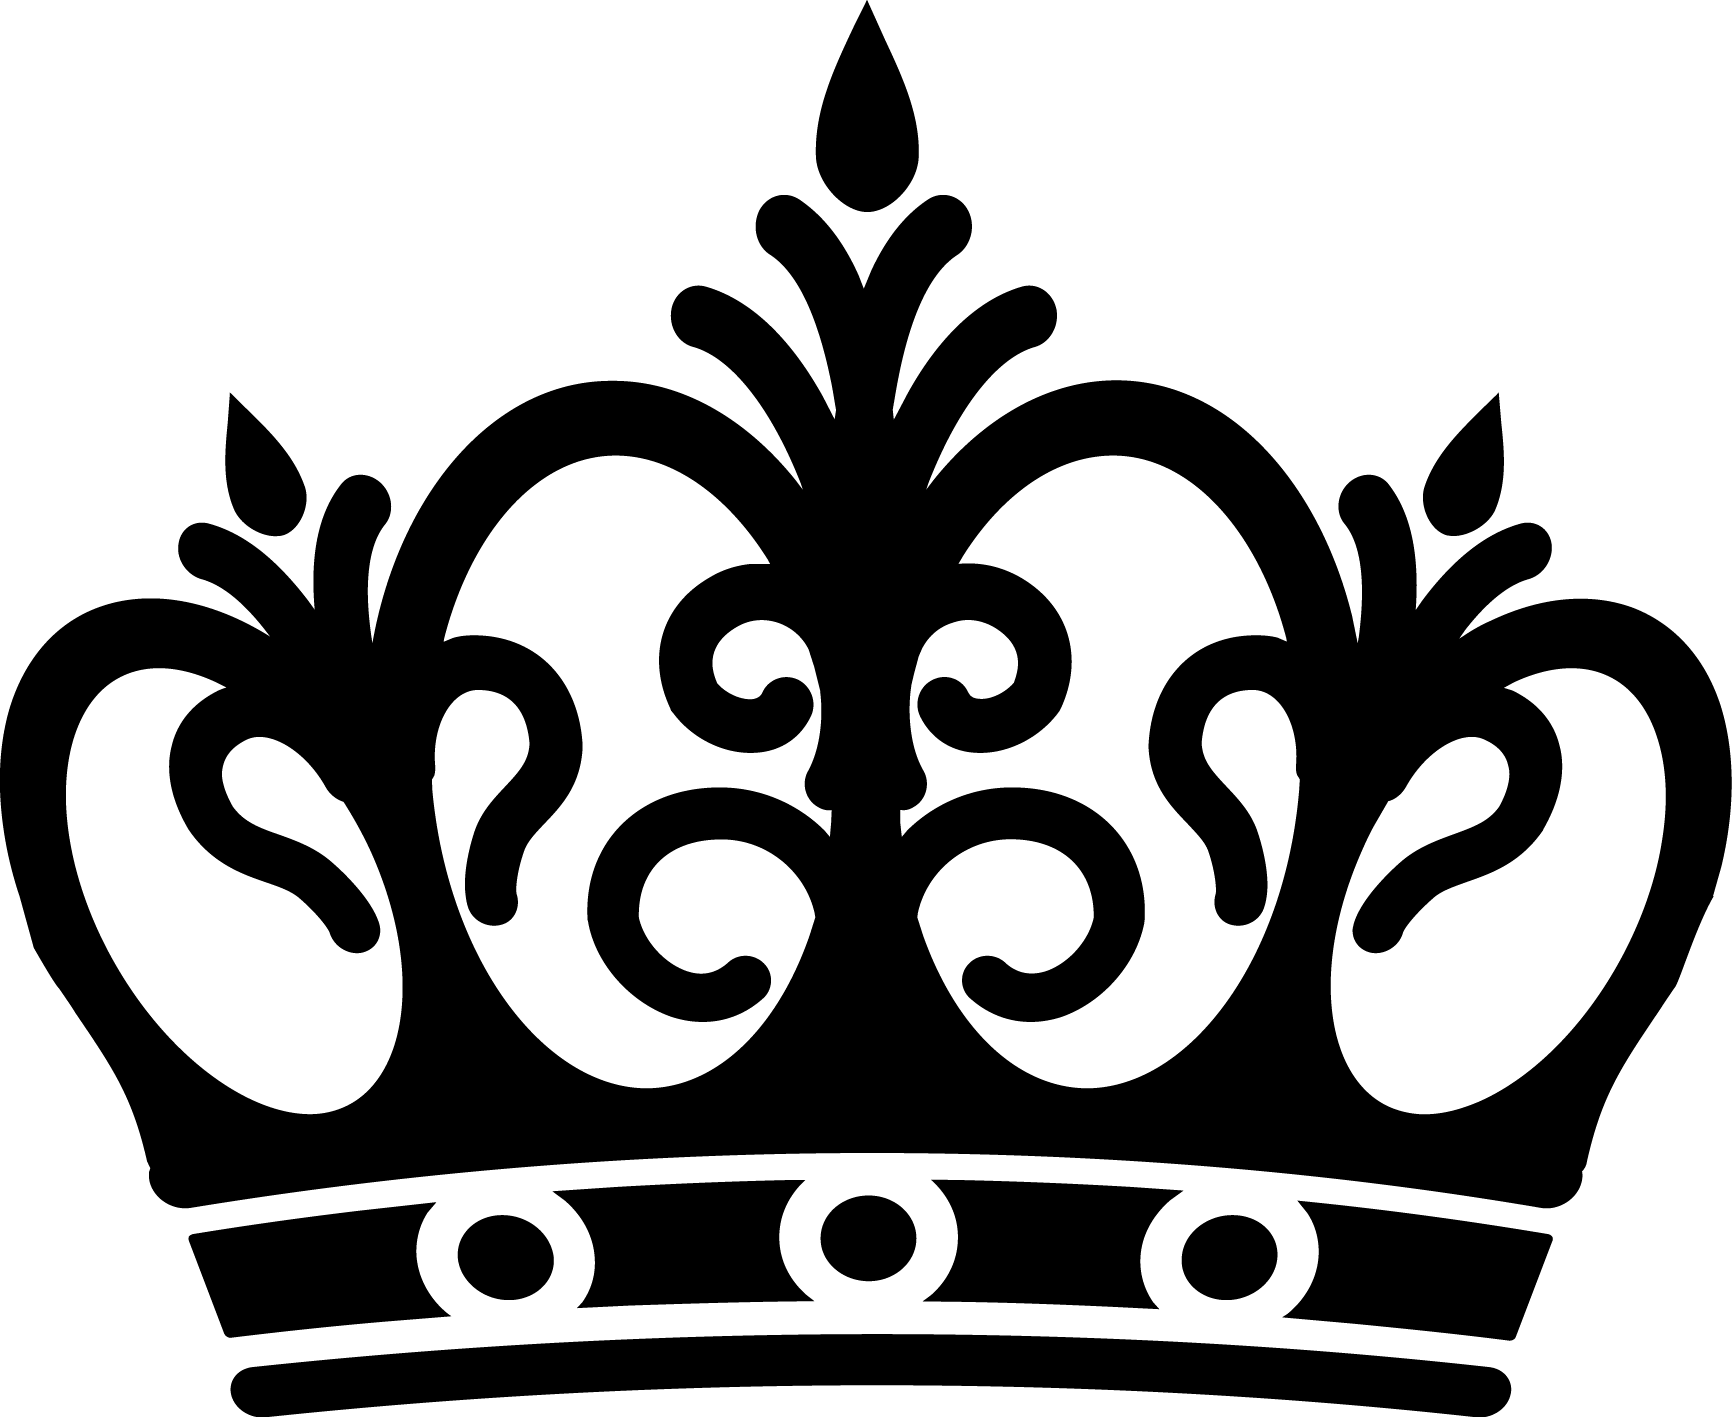 King and Queen Crown Logo - Free Queen Crown Cliparts, Download Free Clip Art, Free Clip Art on ...